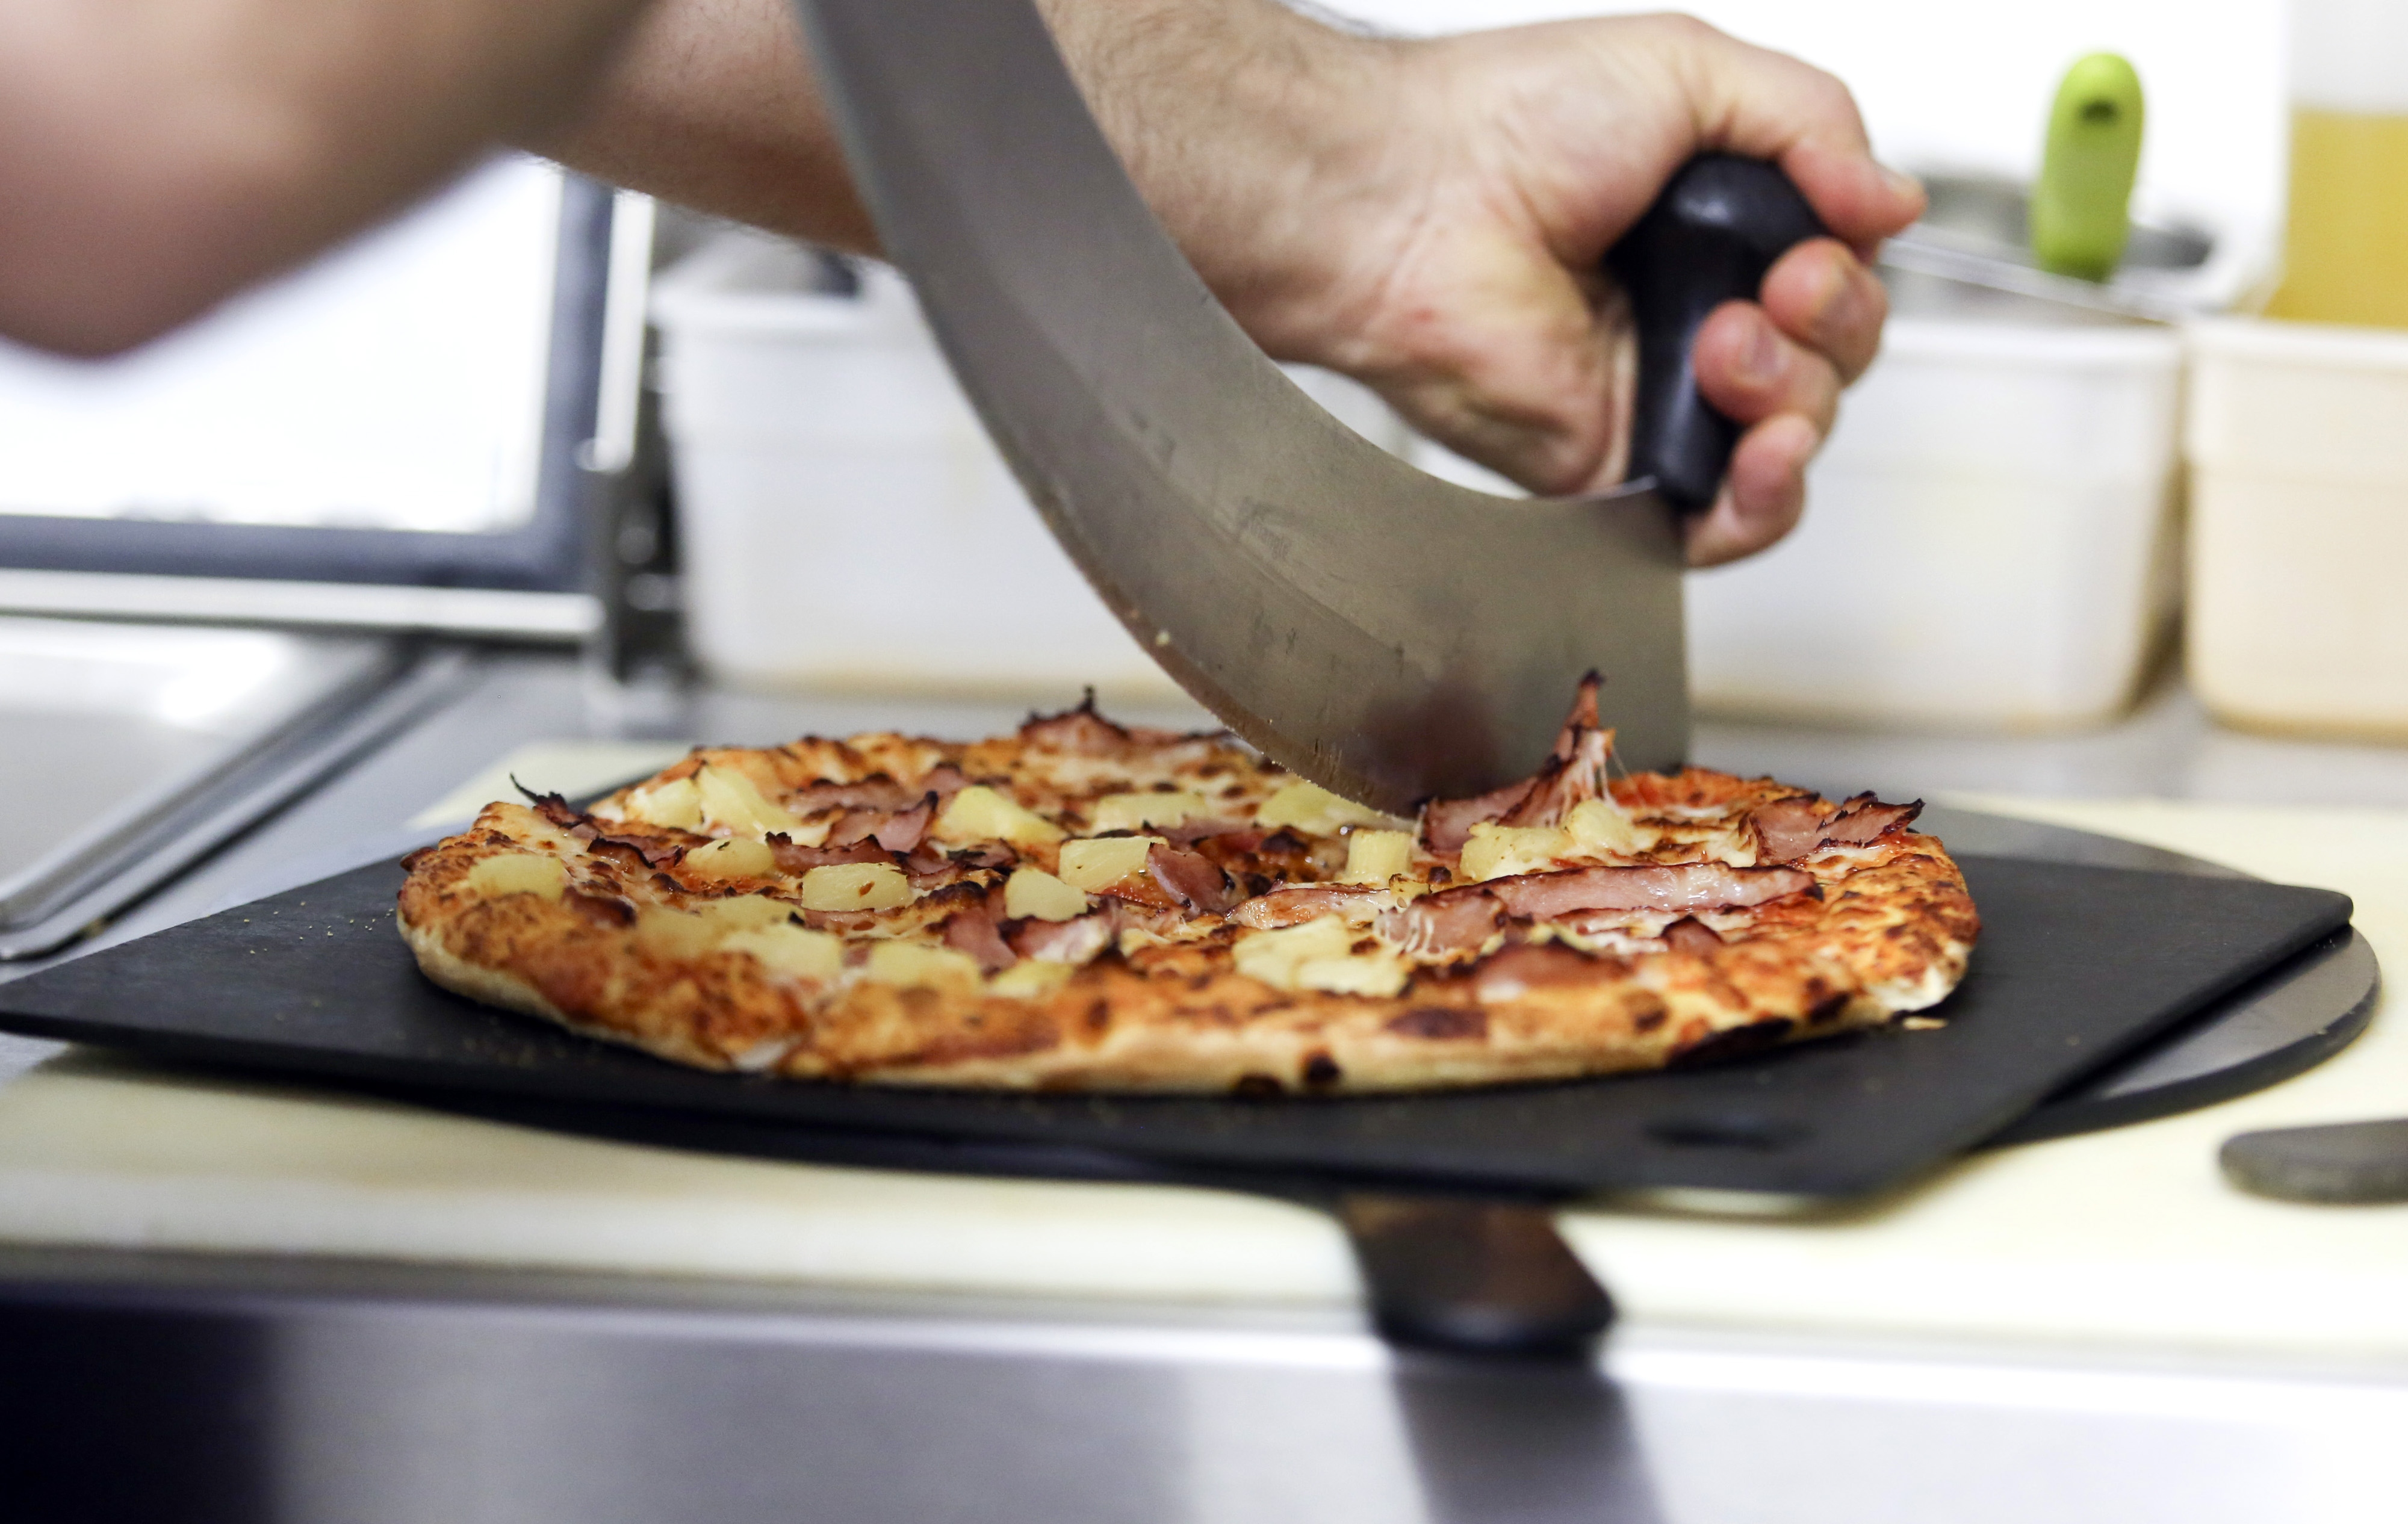 Pizza Hut Wants to Send Its Workers to College